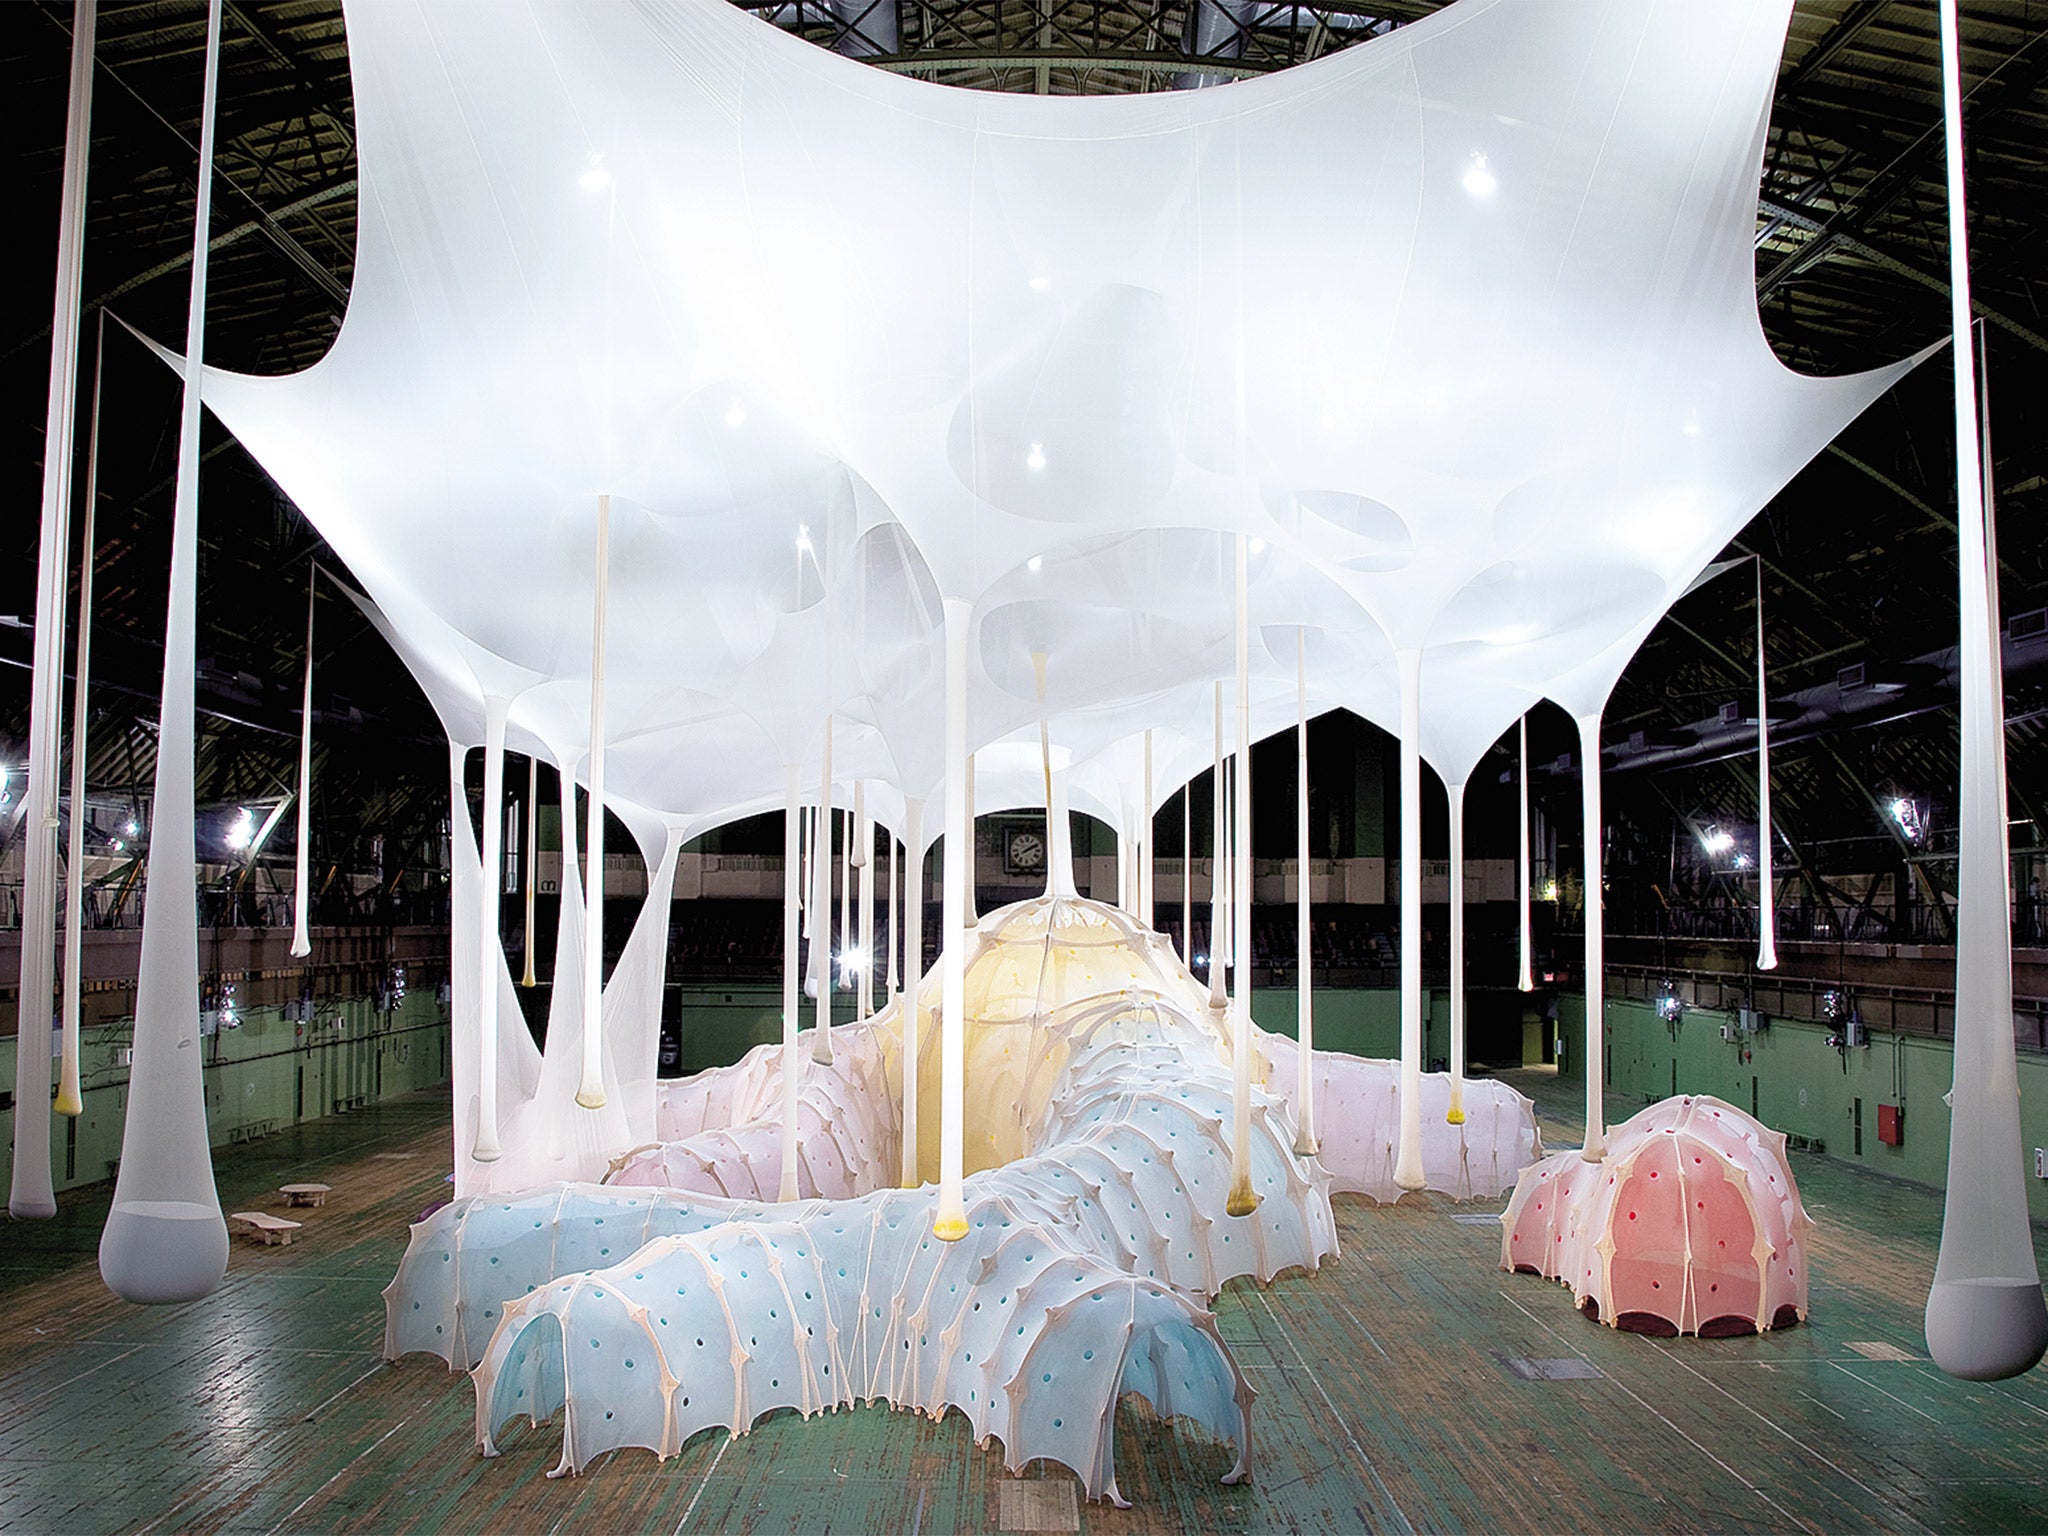 ERNESTO NETO: ANTHROPODINO (2009) ‘Neto’s installations comprise acres of Lycra mesh, at once sensuous and surreal, that invite visitors to escape the rigidity of their everyday interiors’